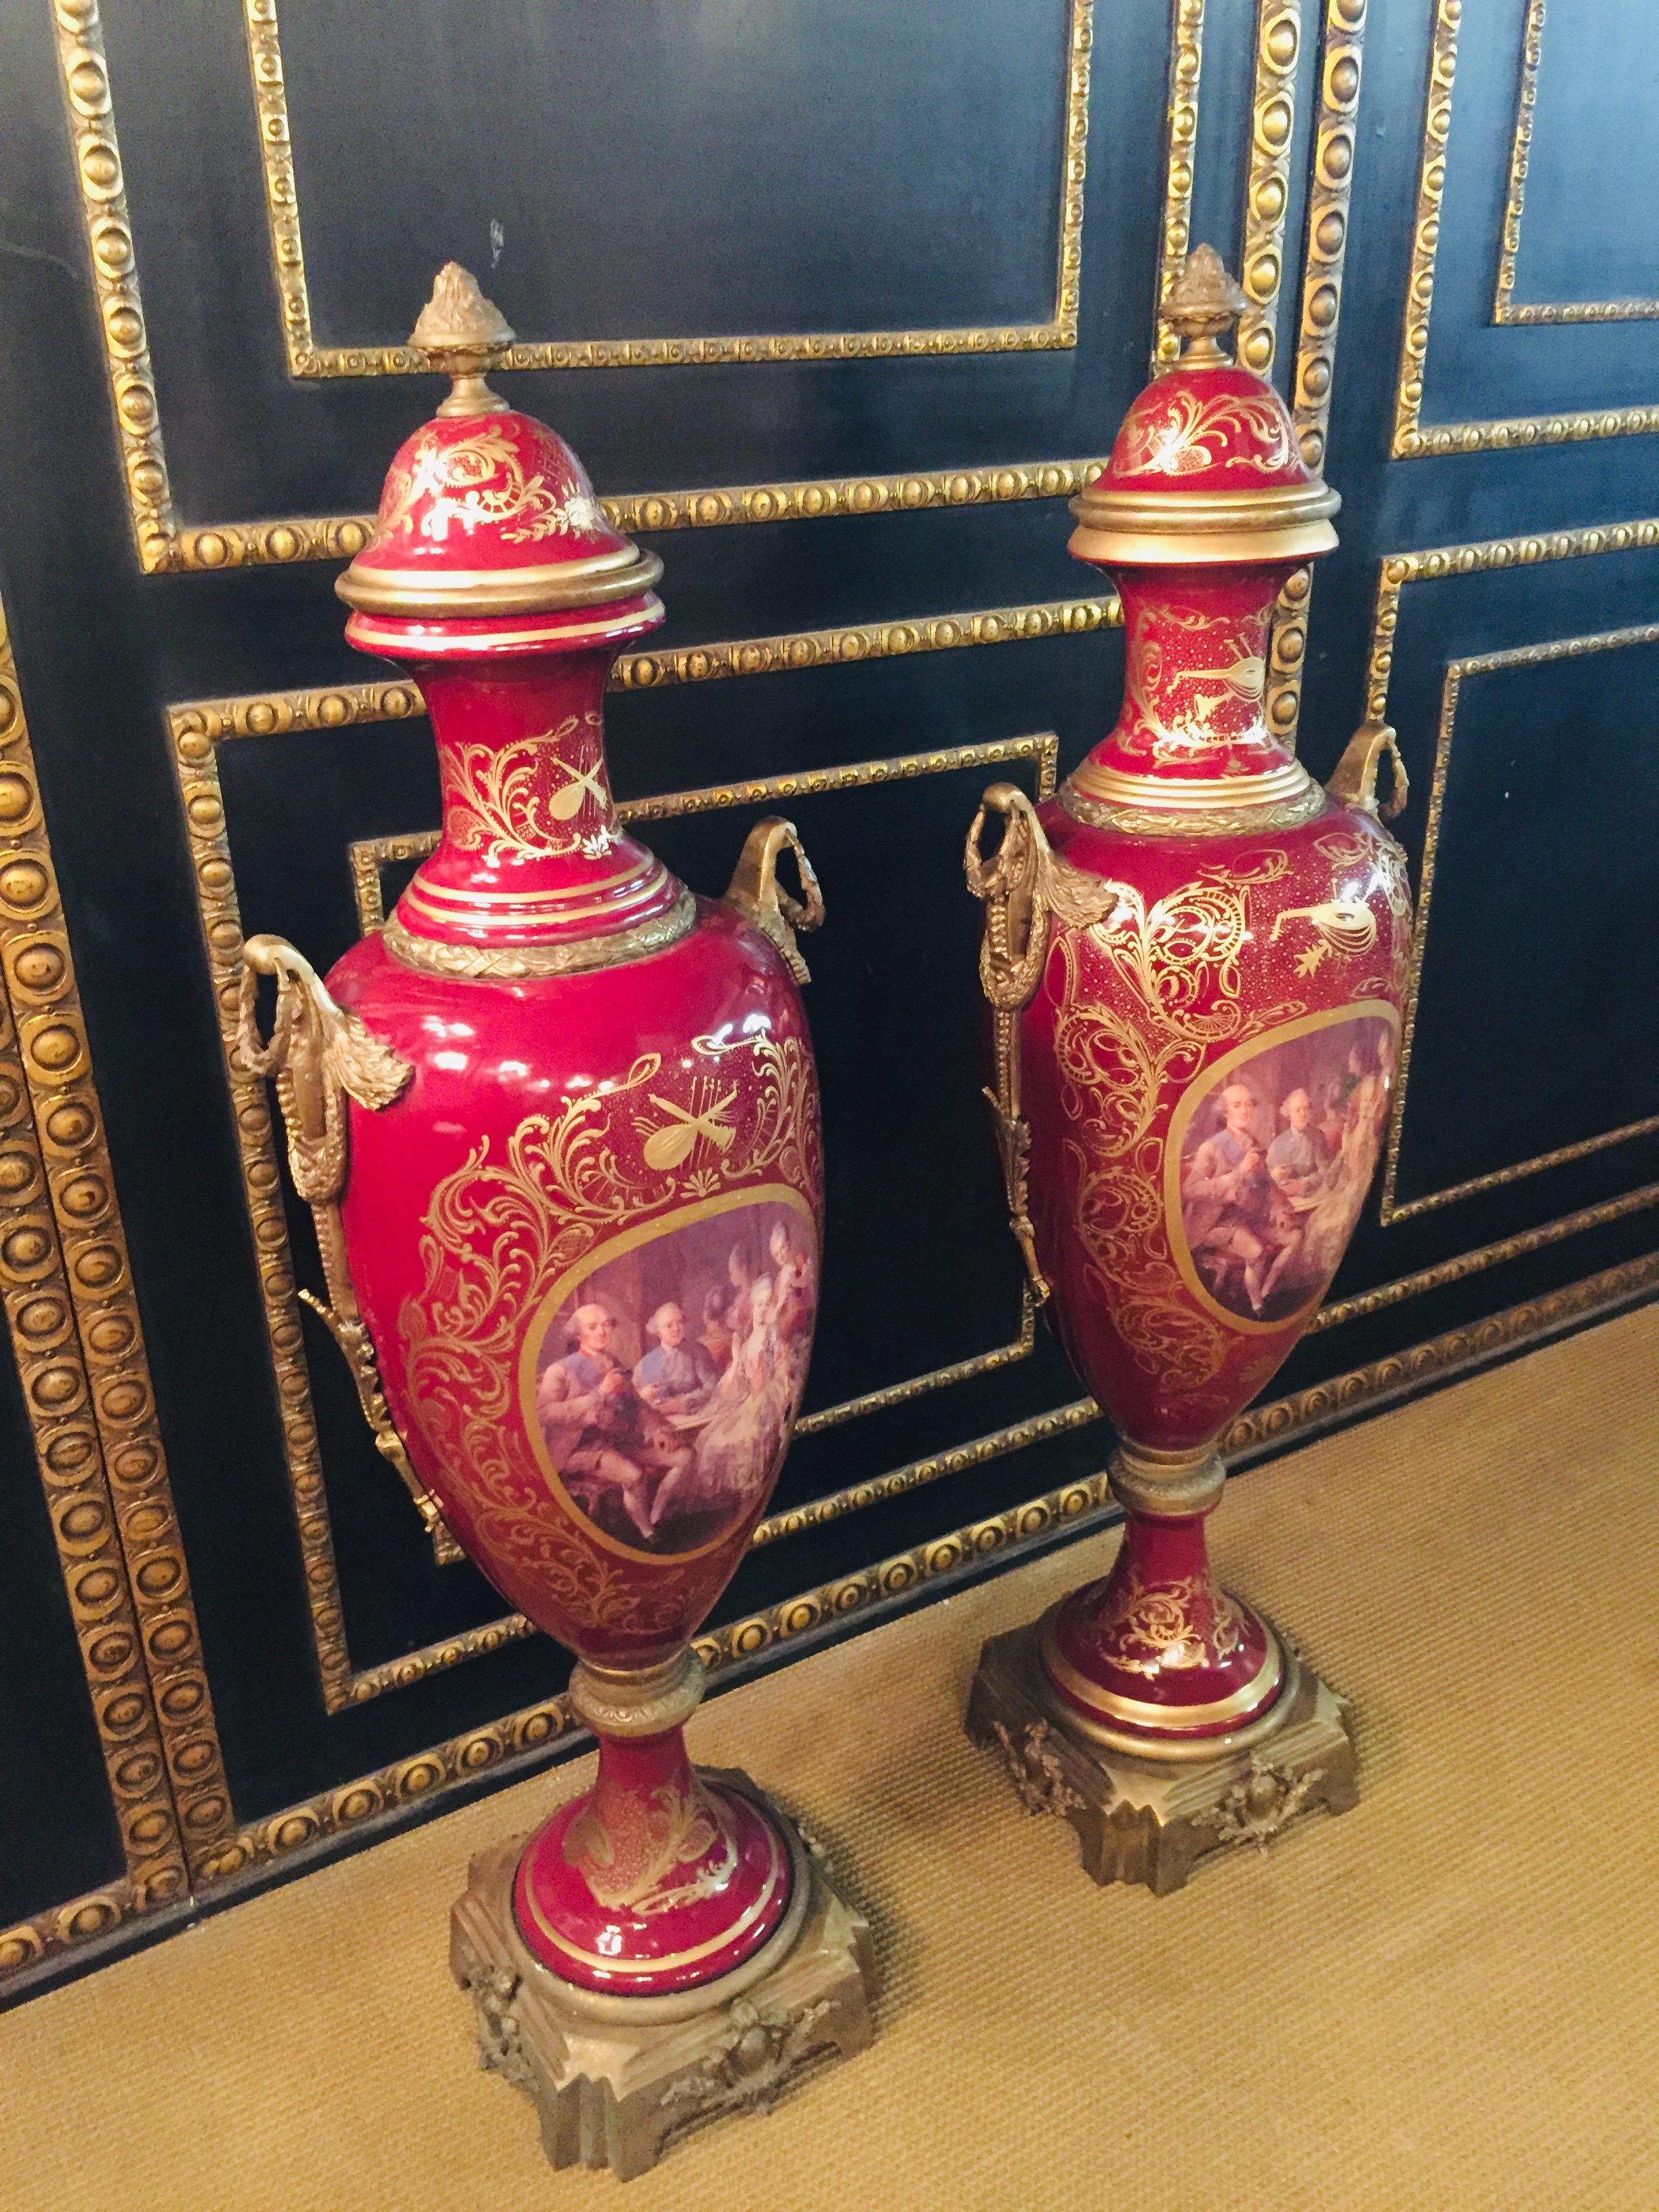 2 Sevre vases Marie Antoinette
Engraved and patinated bronze mountings. Colored representations.